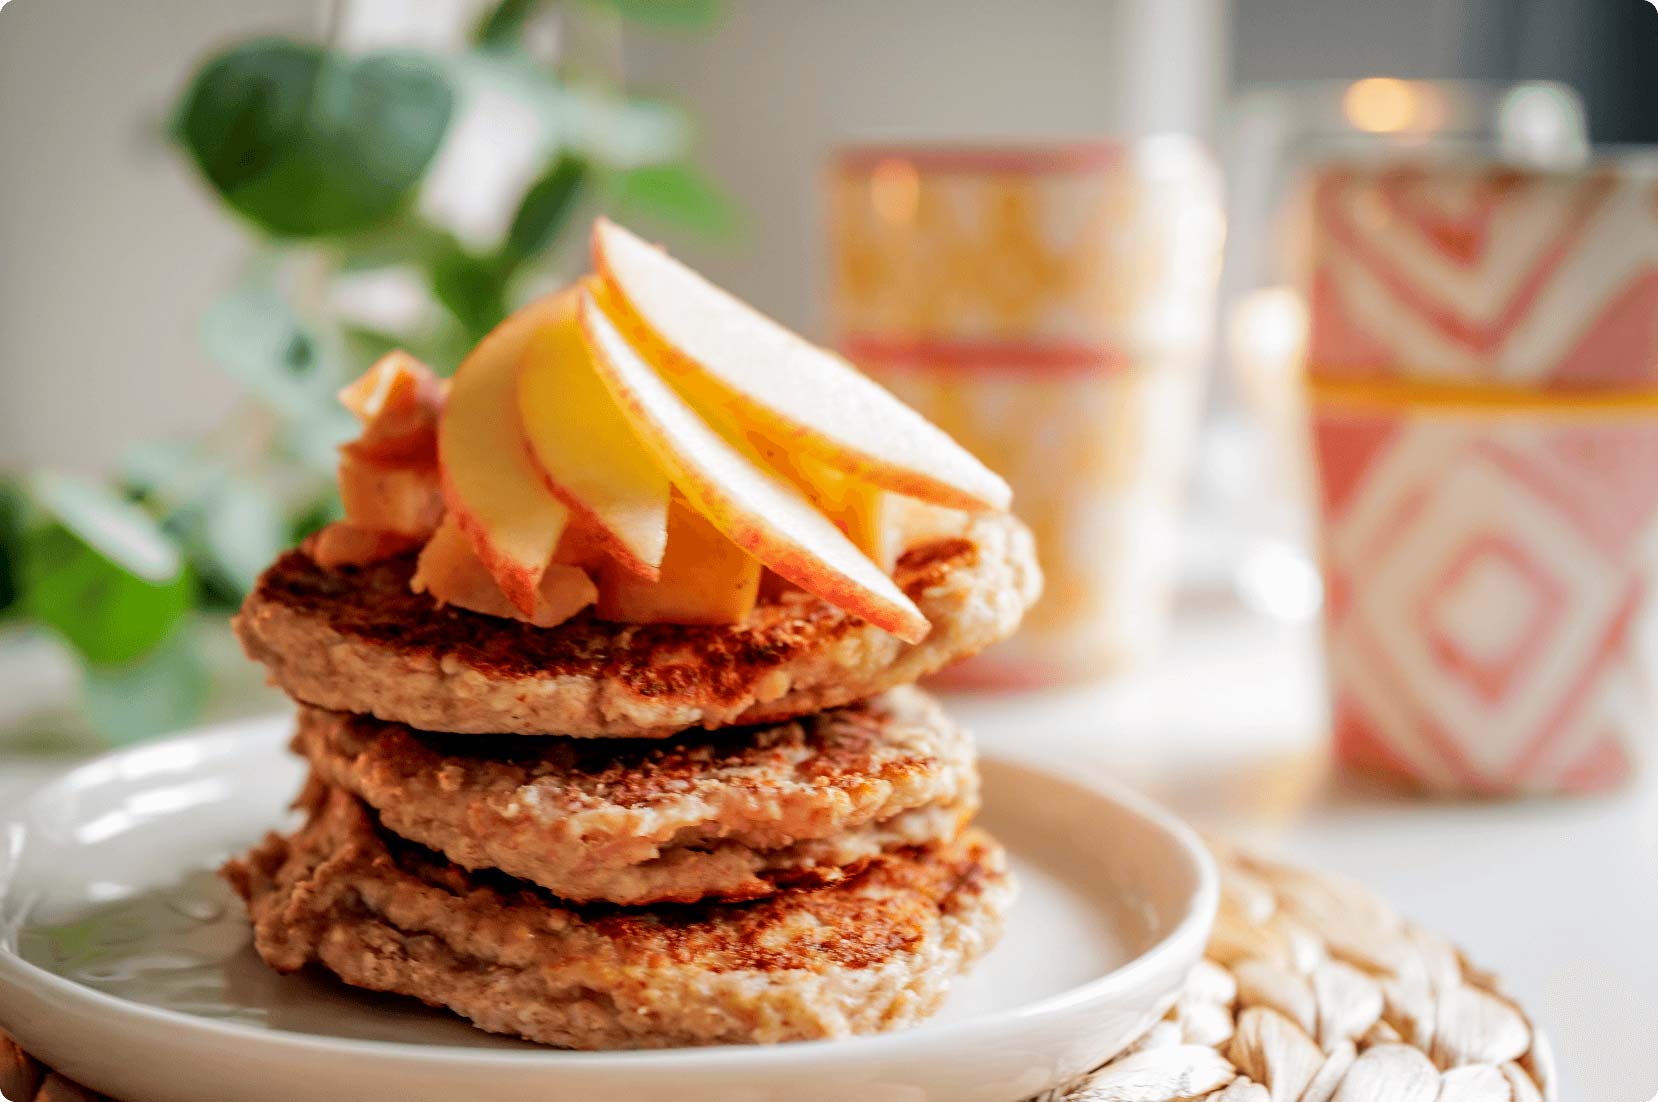 Oat pancakes with apples